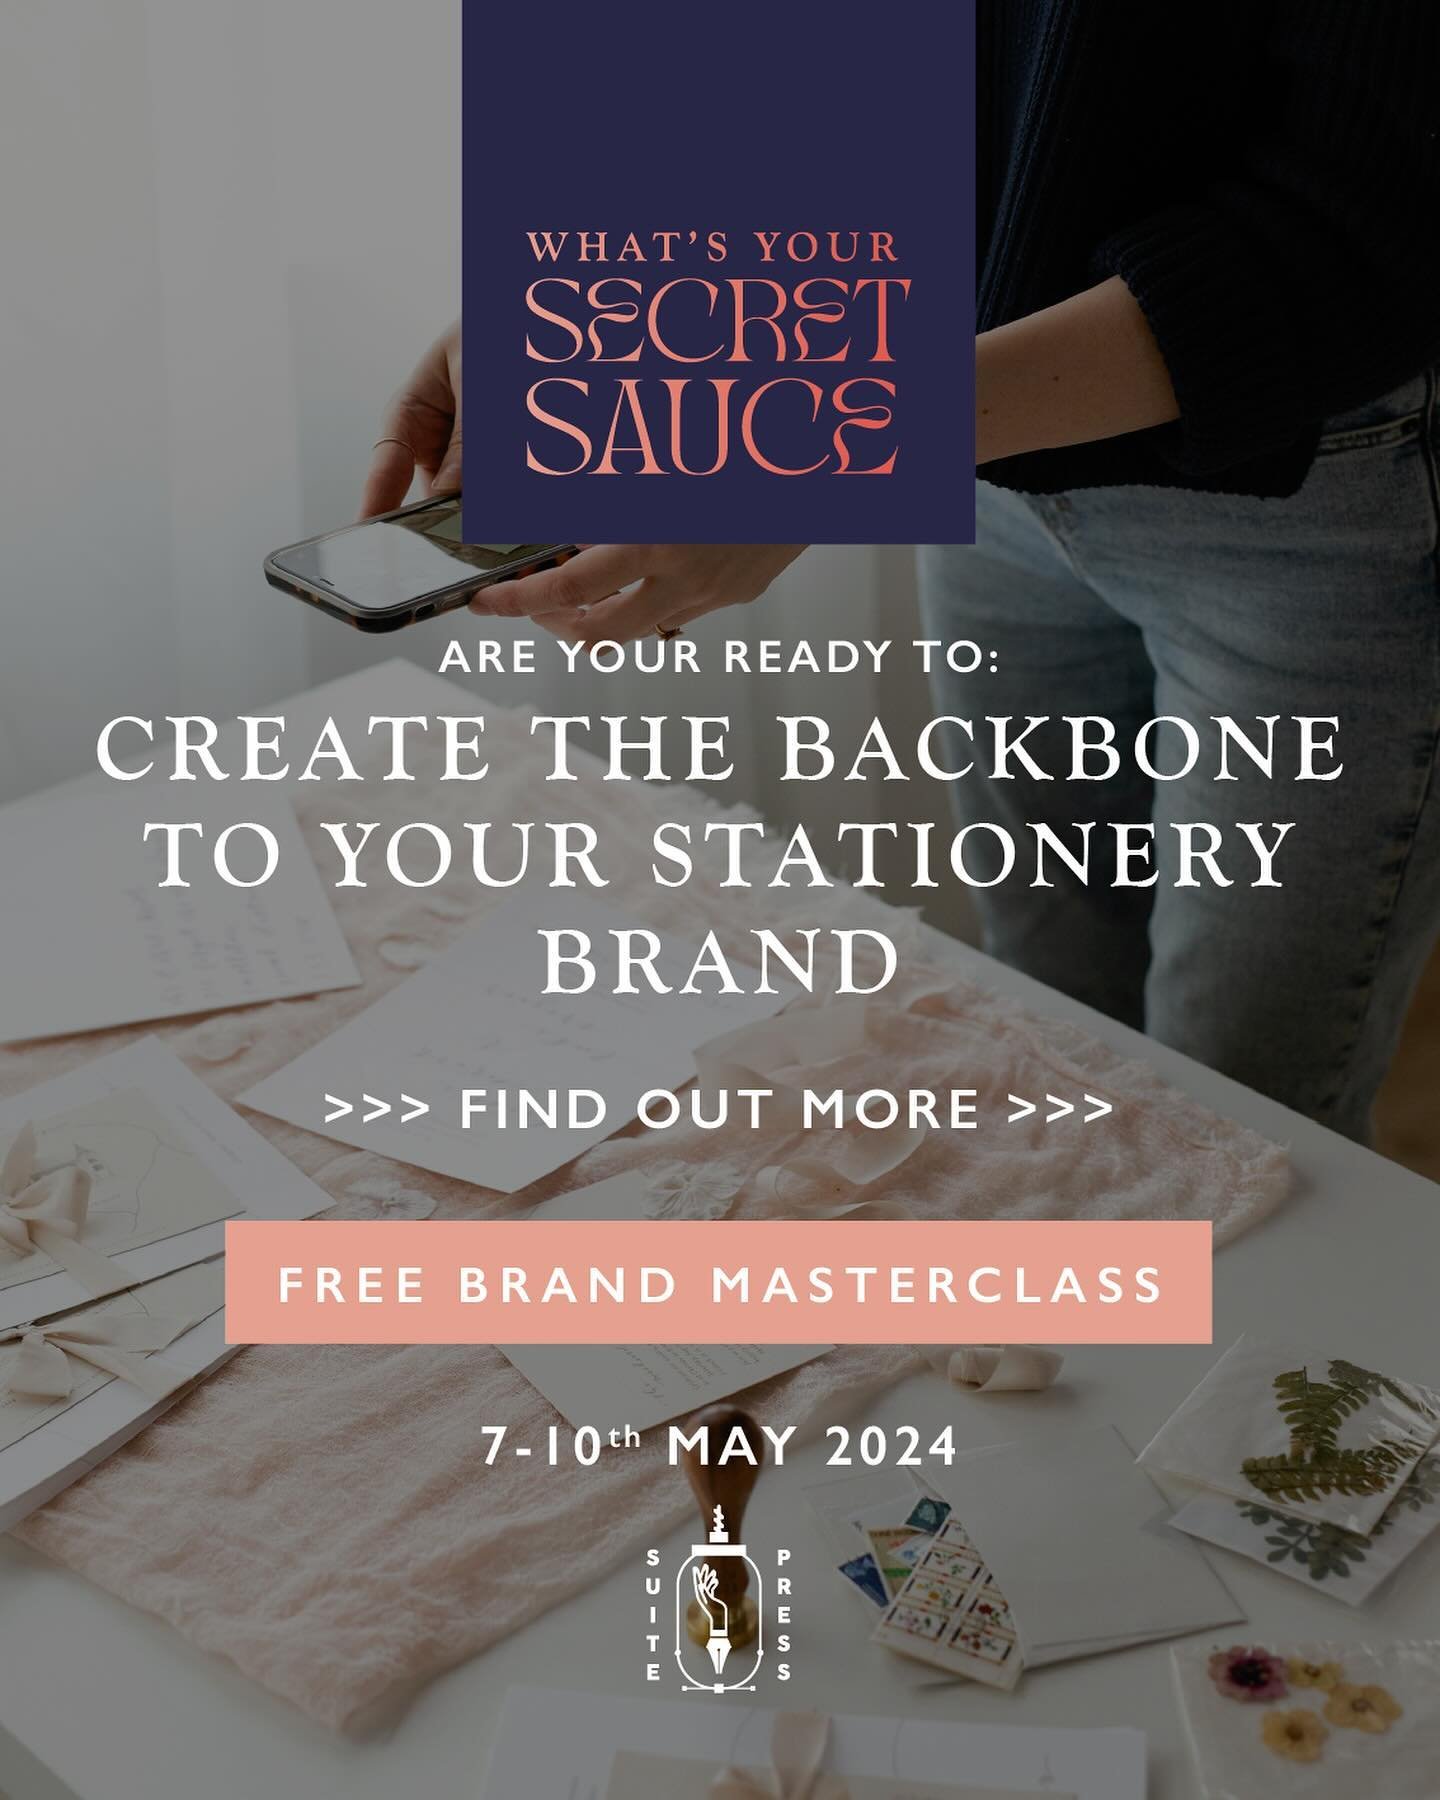 ARE YOU READY FOR A SERIOUS GLOW UP? Prep has finished for the immense 4-day free masterclass running next week here at Suite Press, and it&rsquo;s going to be spectacular!

Whether you are a new or seasoned stationery designer (or wondering how to